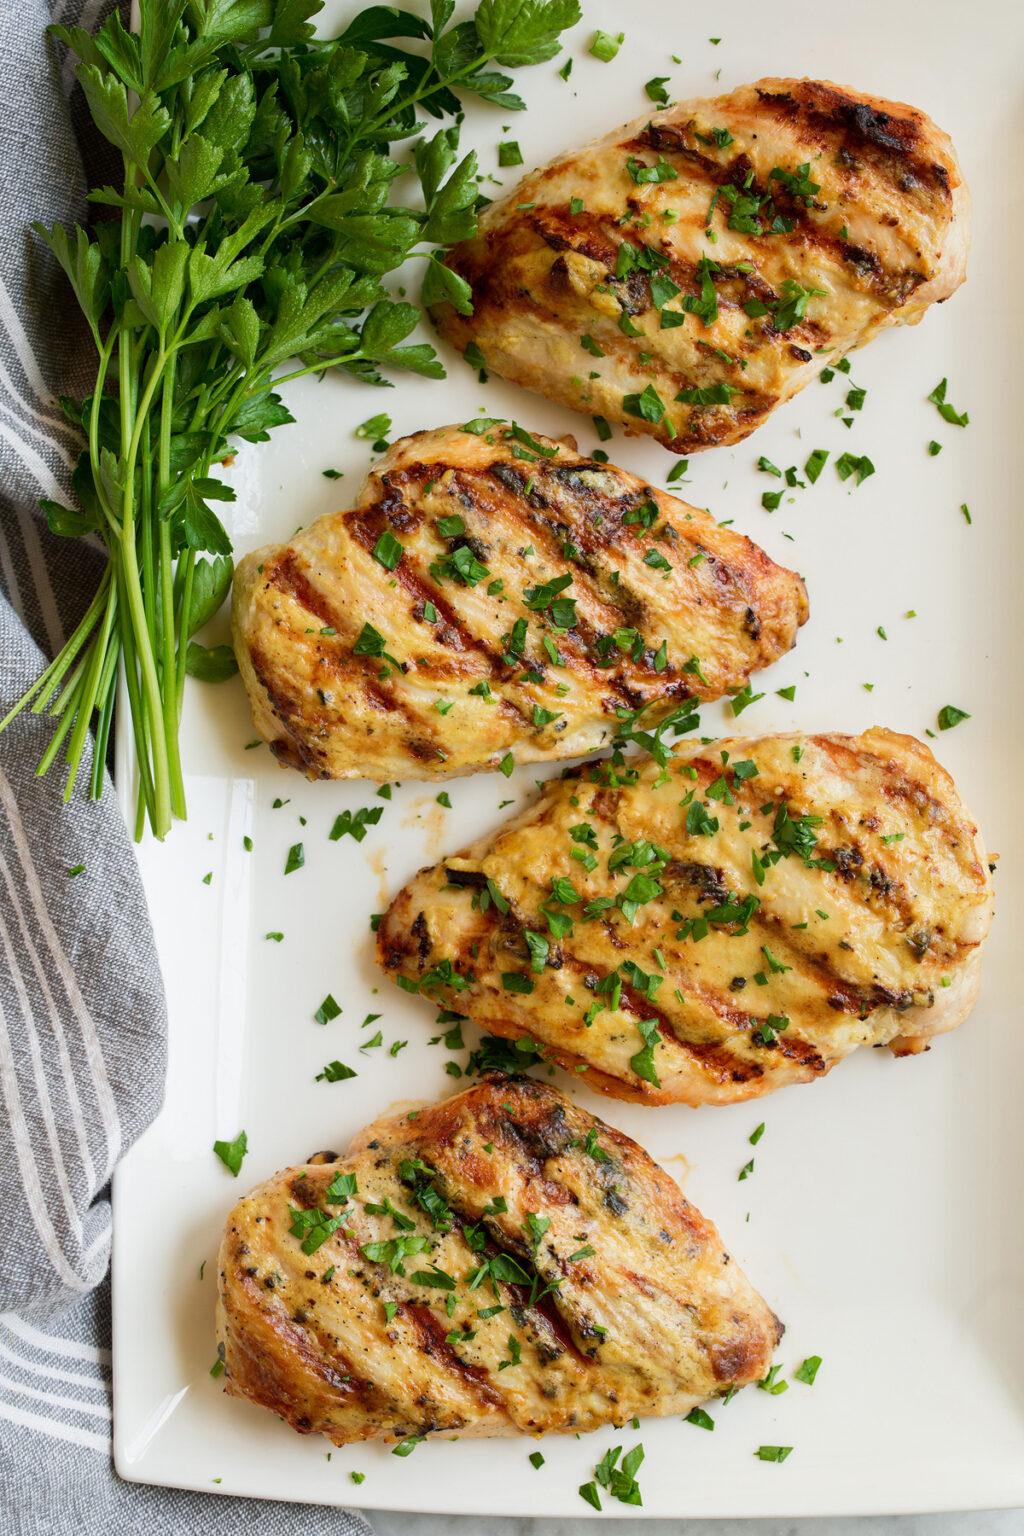 Grilled Dijon Chicken (4 Ingredients!) - Cooking Classy